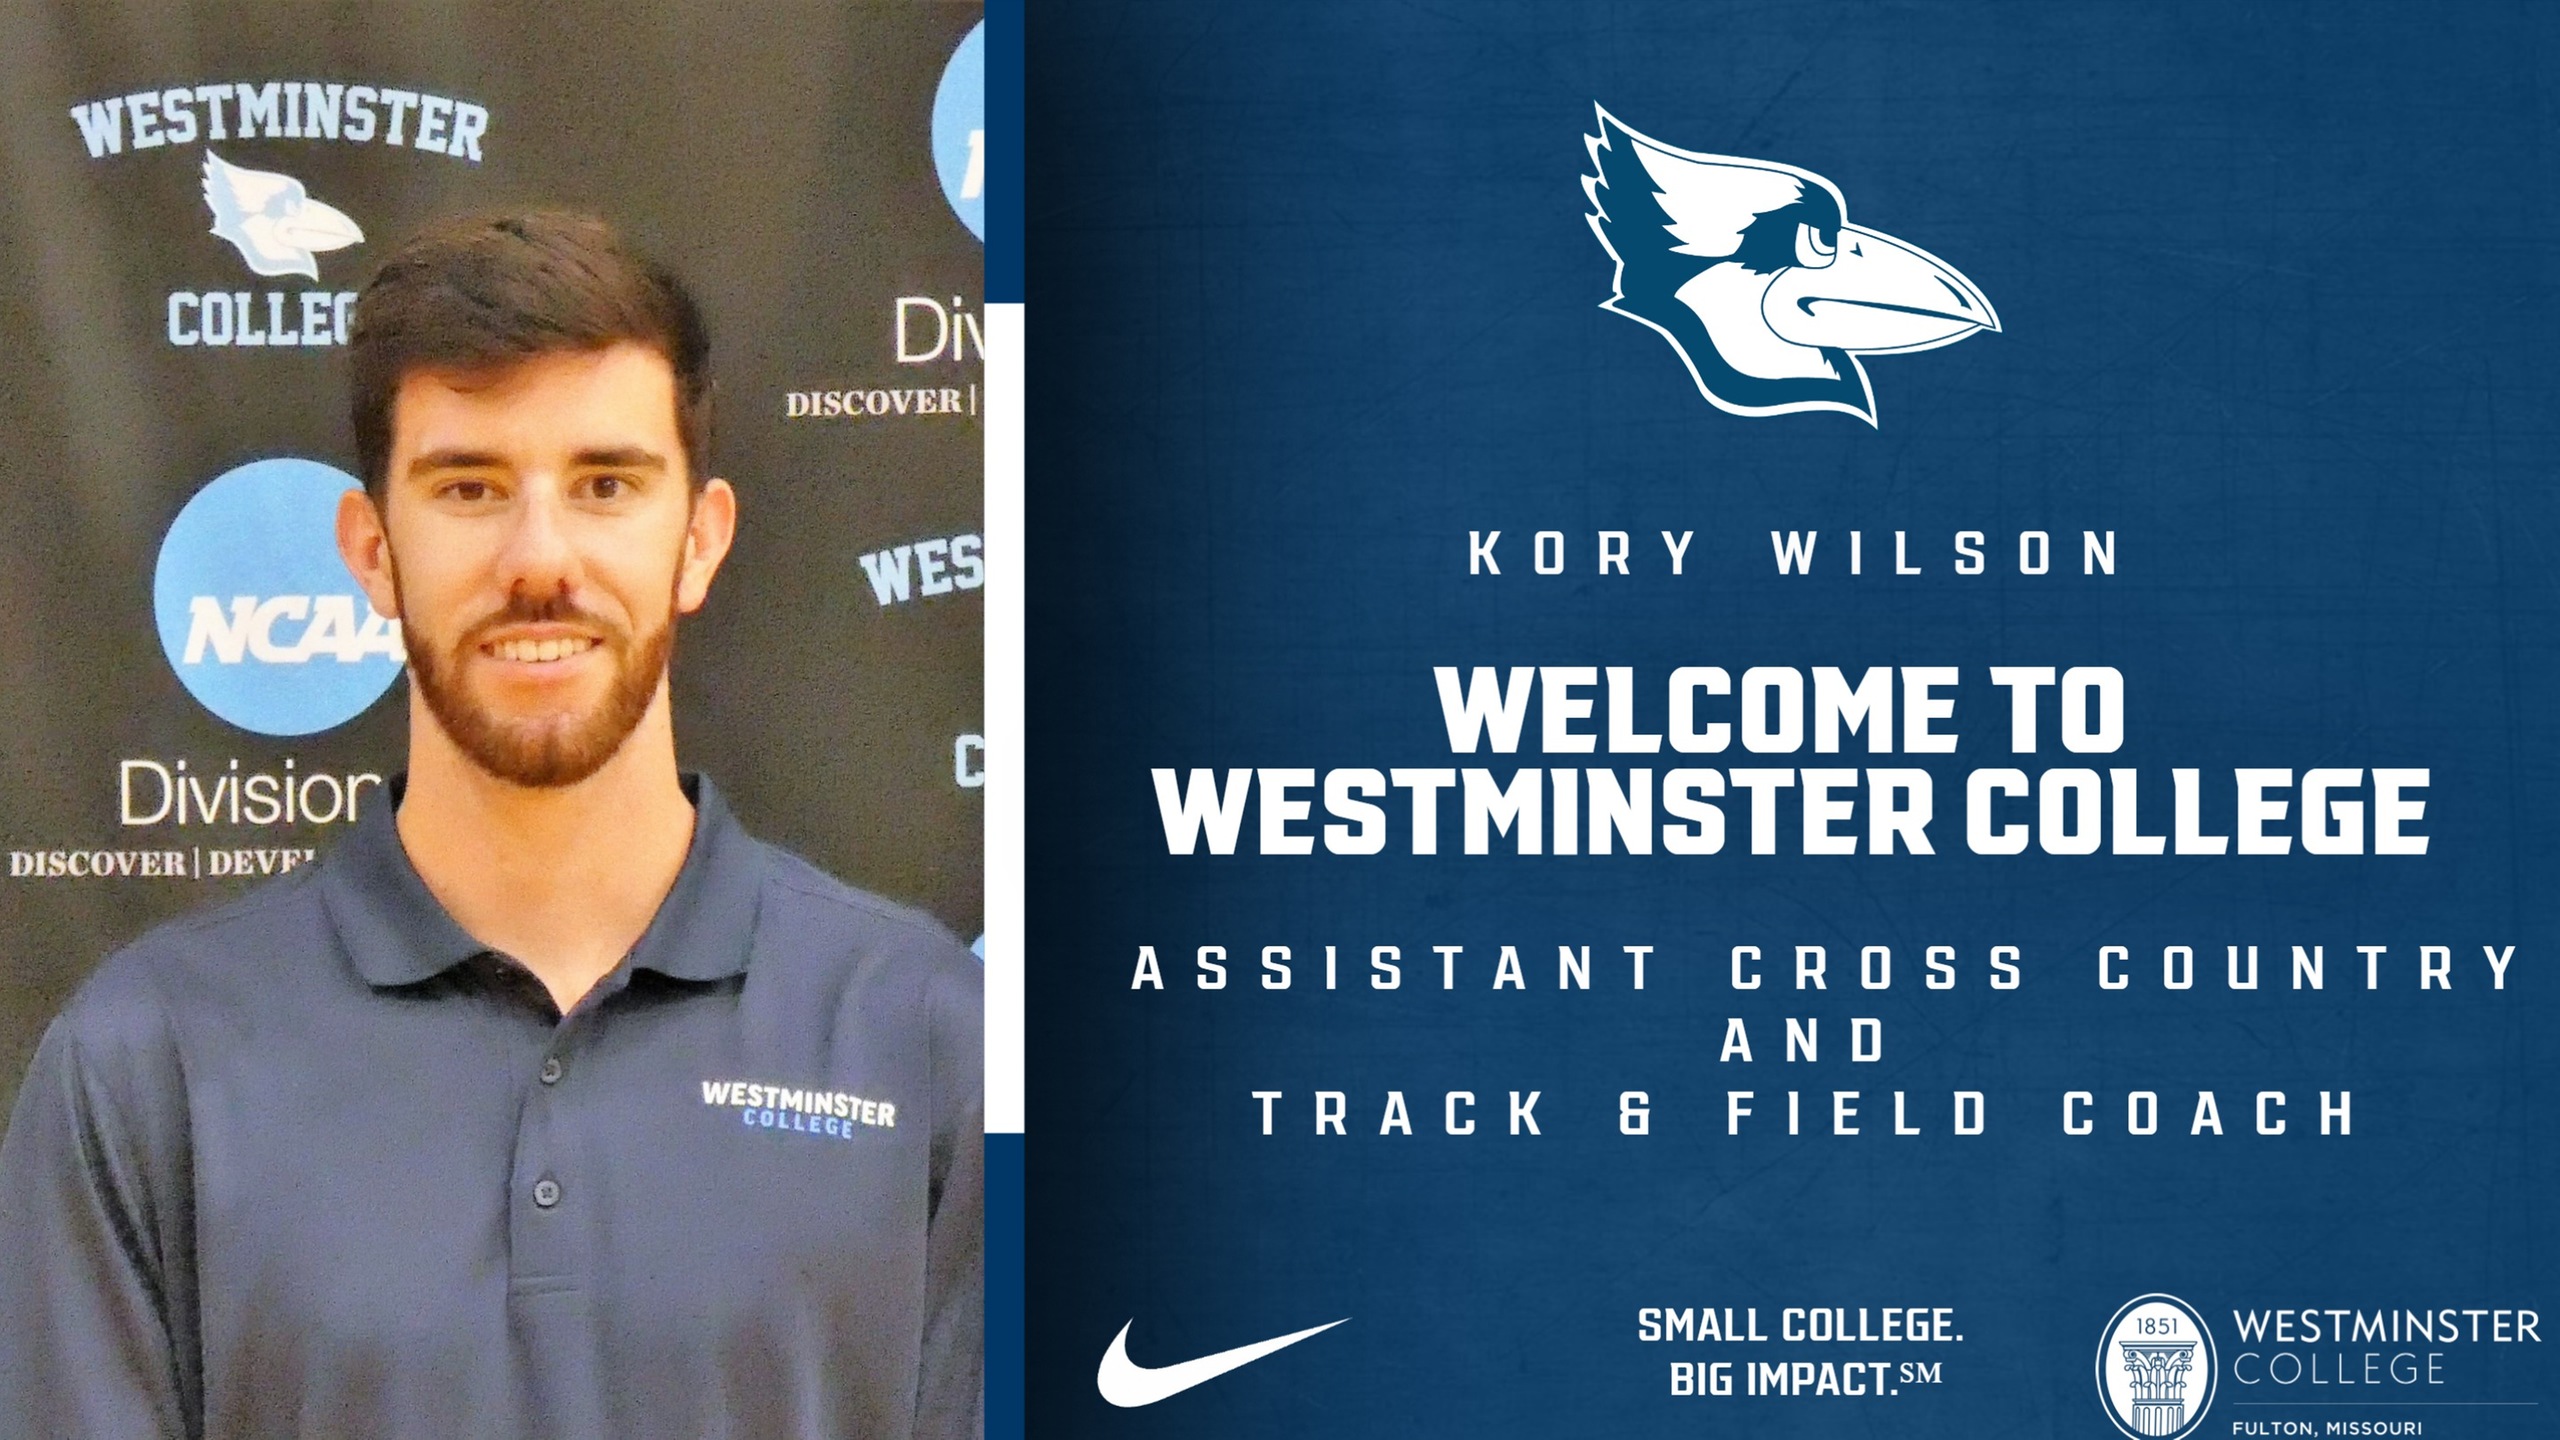 Kory Wilson Named Assistant Cross Country and Track & Field Coach